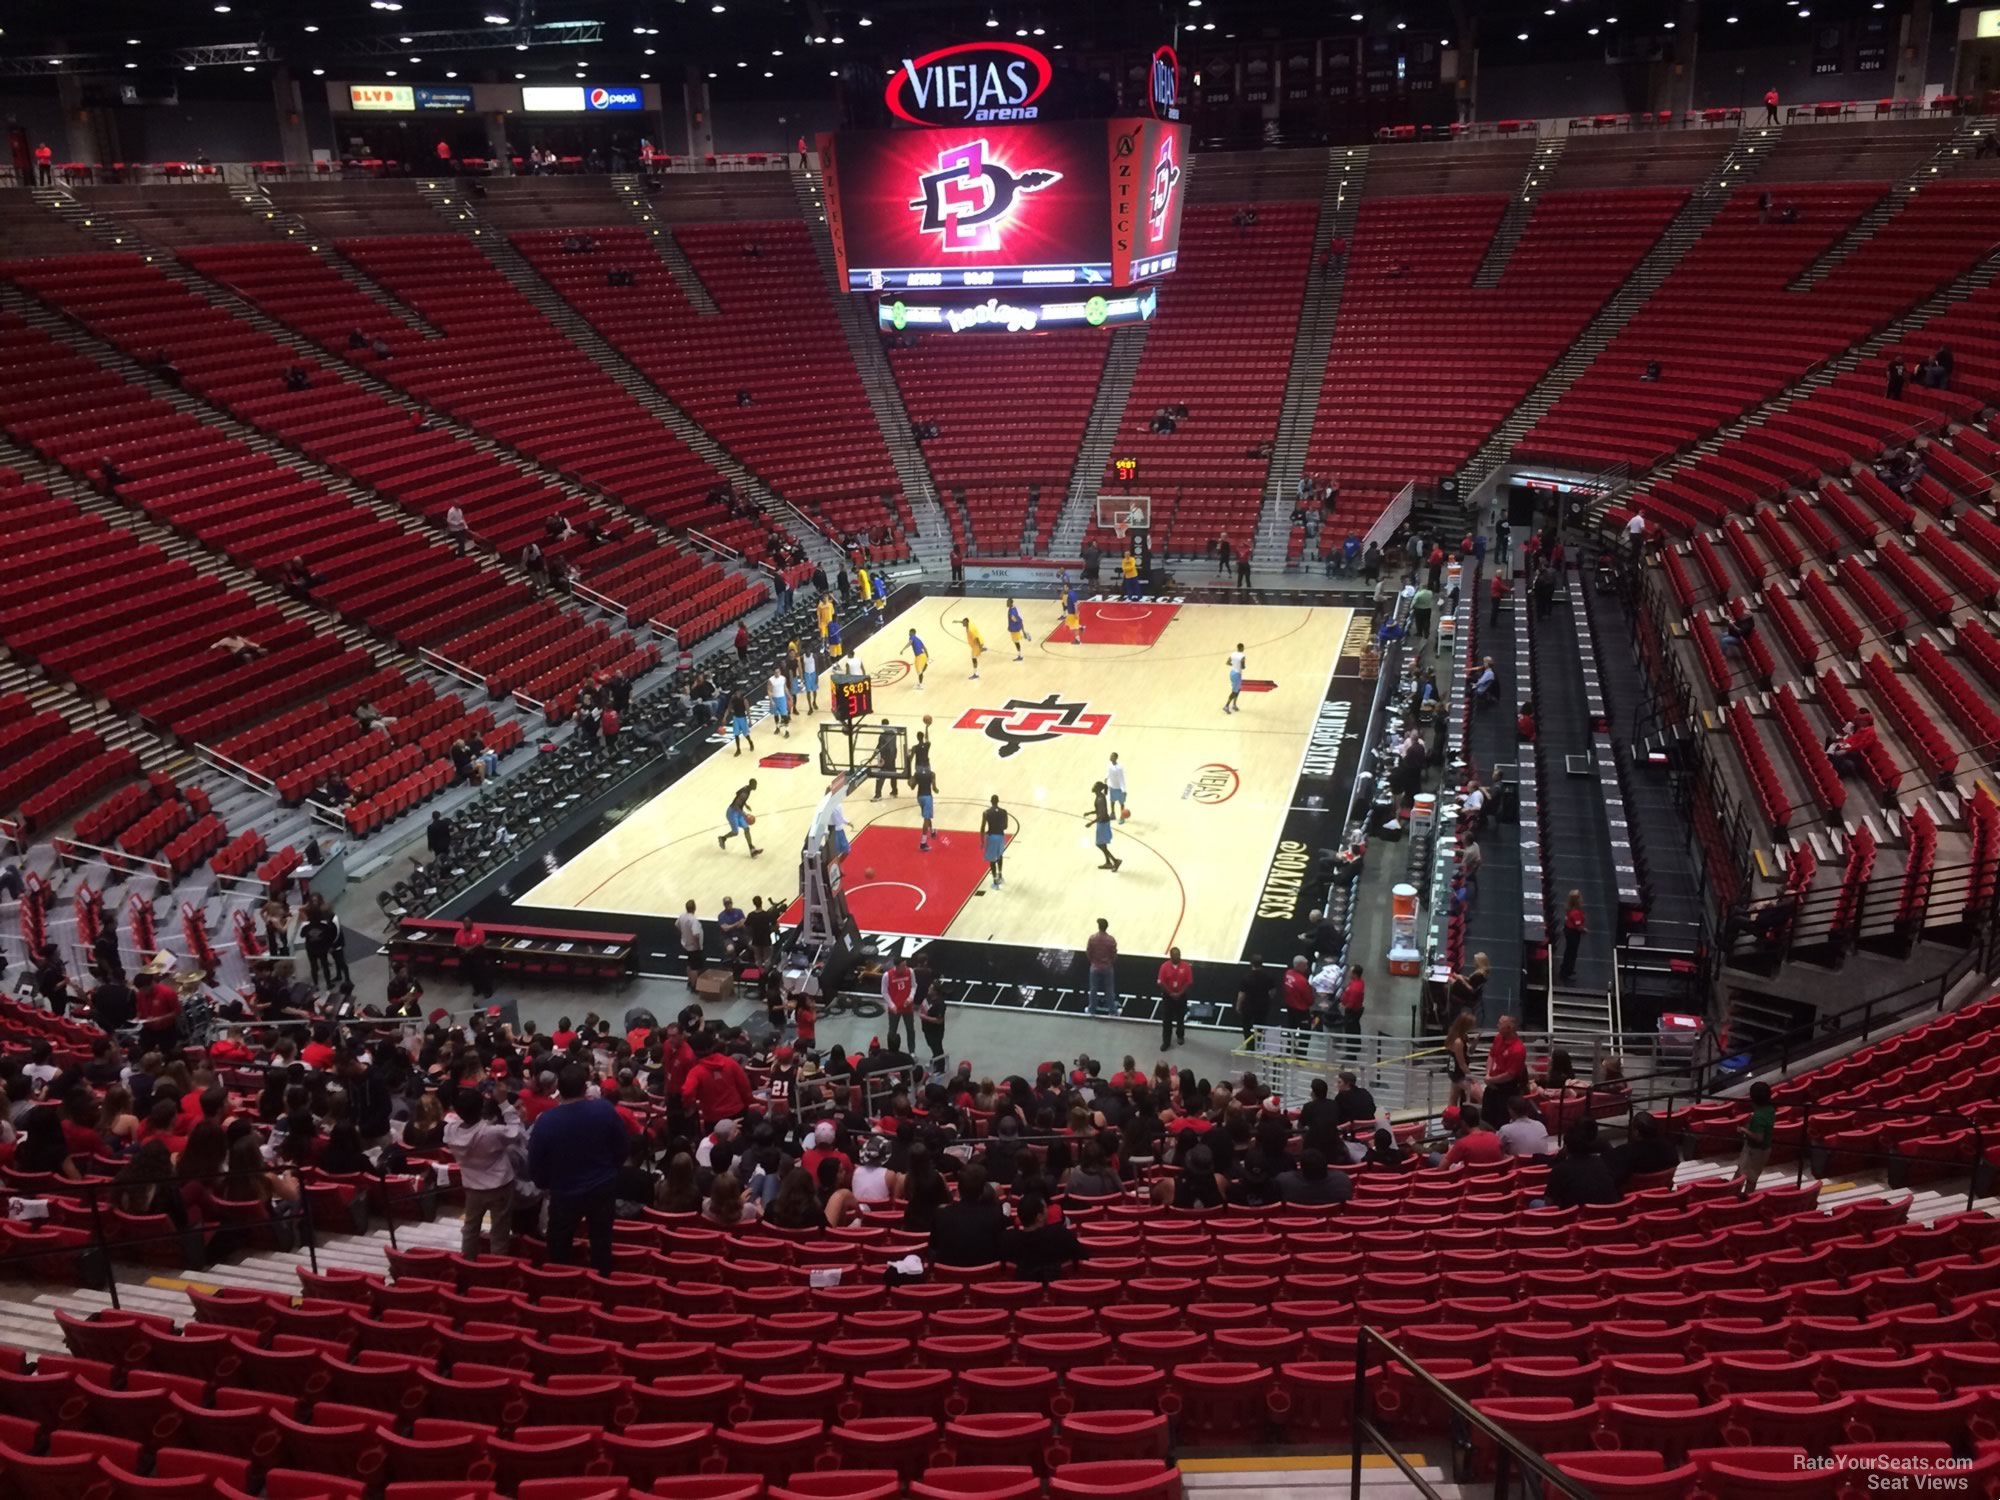 section m, row 30 seat view  - viejas arena